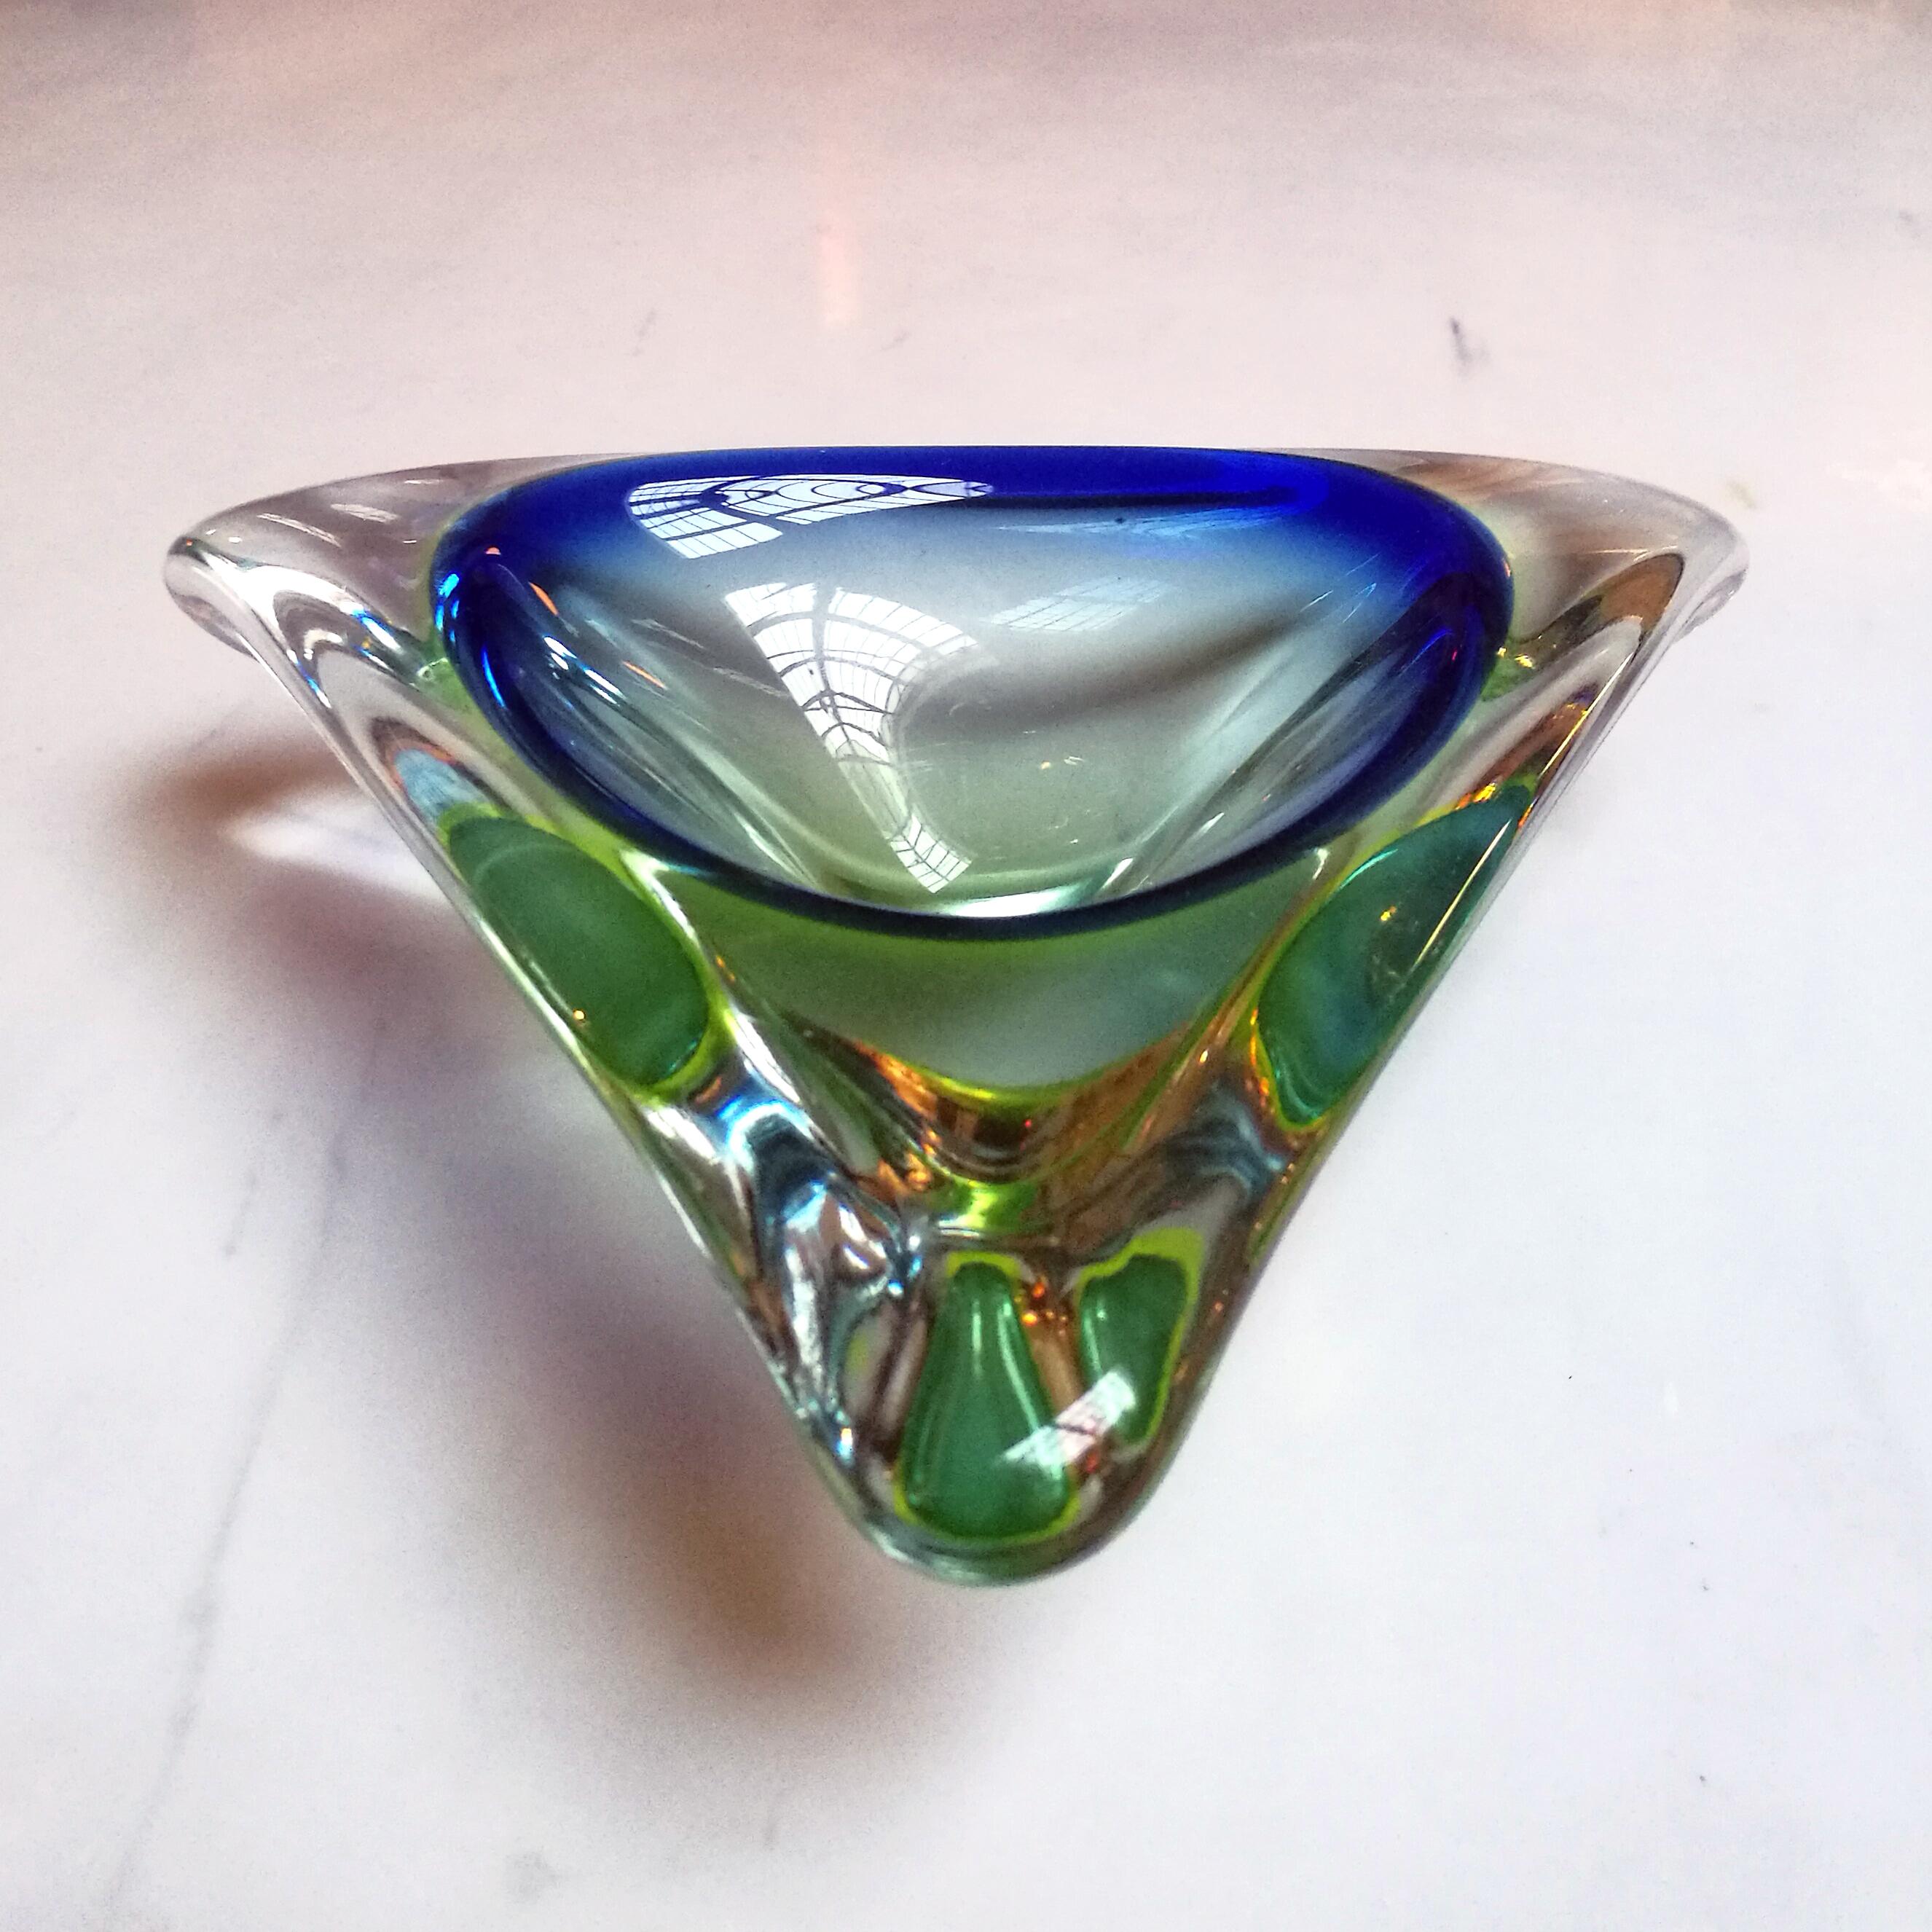 Italianblue and green midcentury Murano glass vase of the Sommersi series, 1950s
Vase of the I Sommersi series, in Murano glass, unique pieces of an exceptional manufacture
This Fantastic series of Murano glass ashtray or pocket empty with various